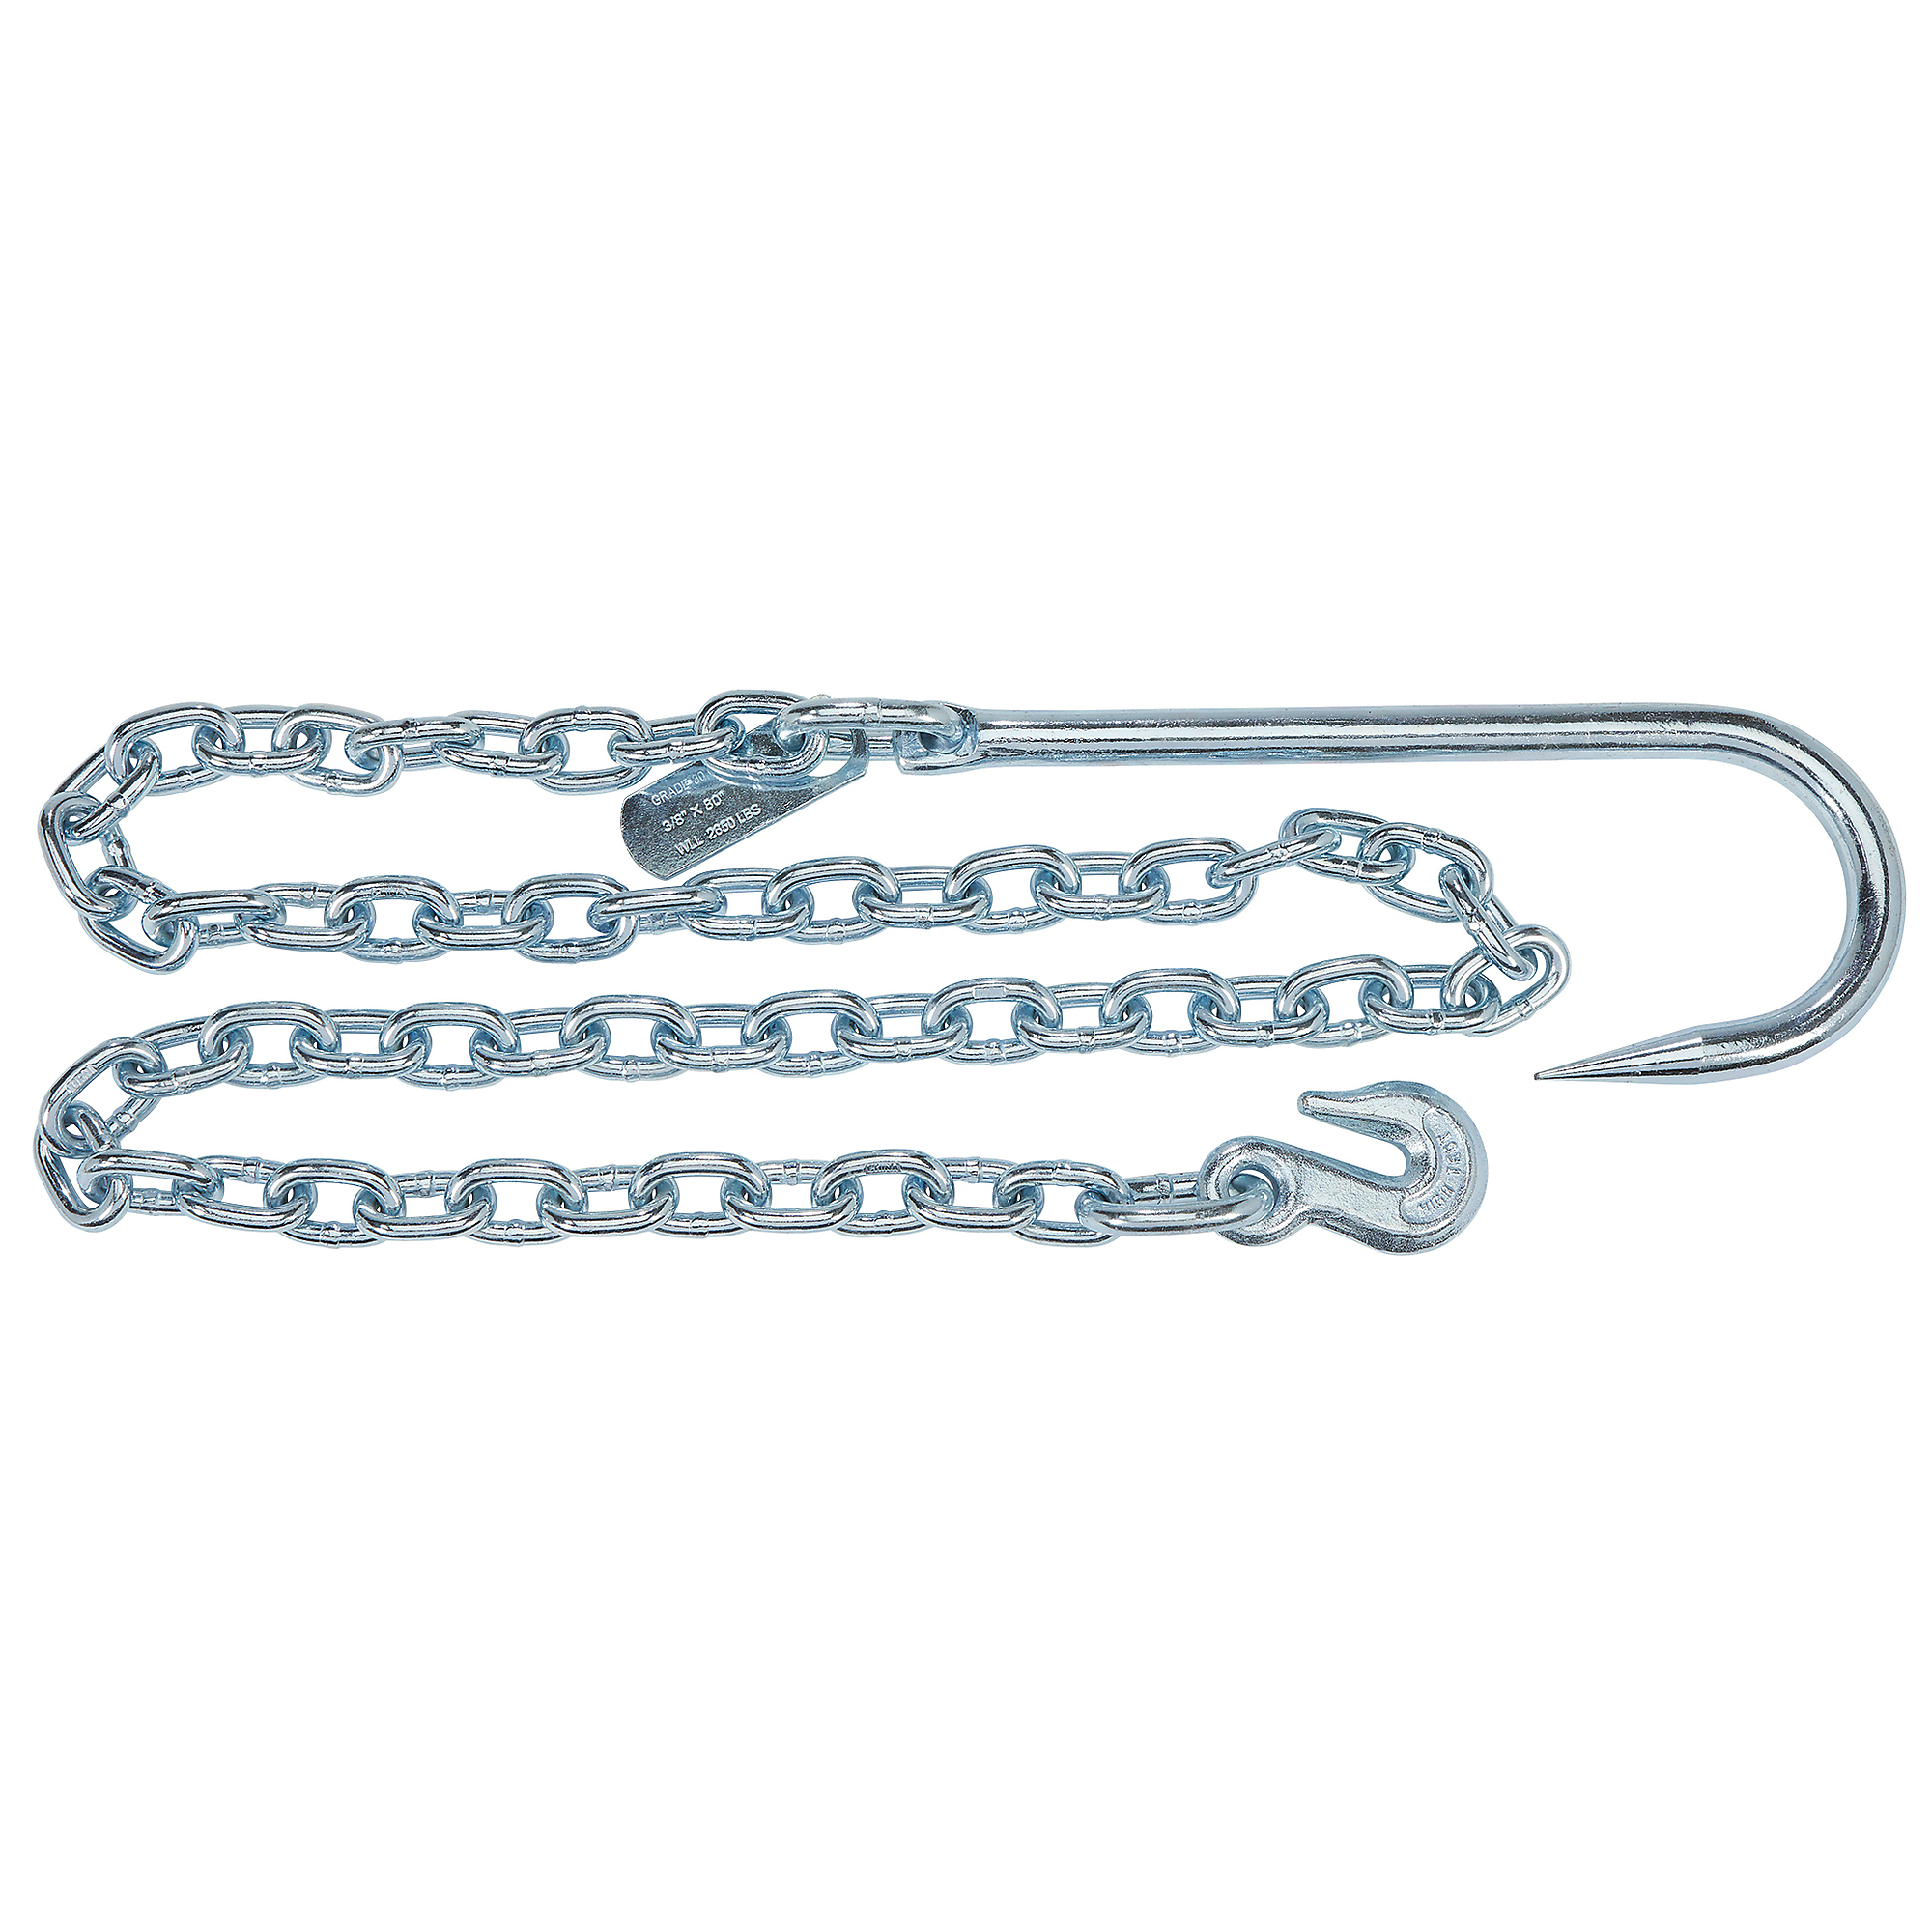 Ultra-Tow 3/8Inch x 80Inch Tow Chain with 15Inch Grab Hook, G30, 2650-Lb. Working Load, 80Inch L, Carbon Steel, Model RDTCPC1006C